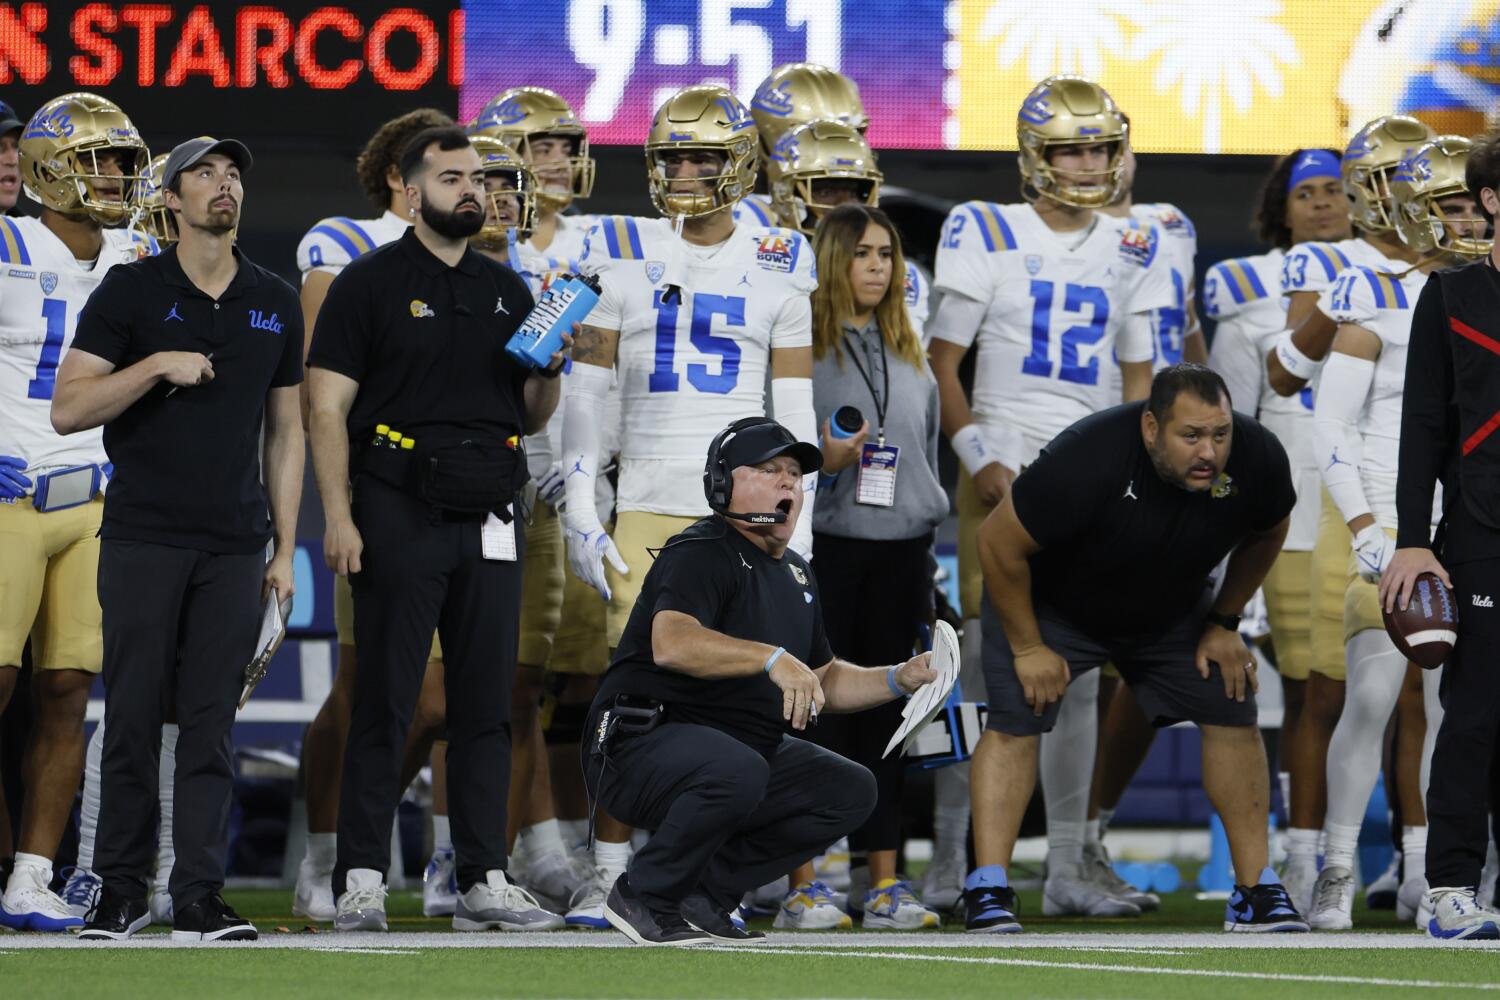 Plaschke: Kelly's heroes — UCLA plays hard for embattled coach in comeback win over Boise State